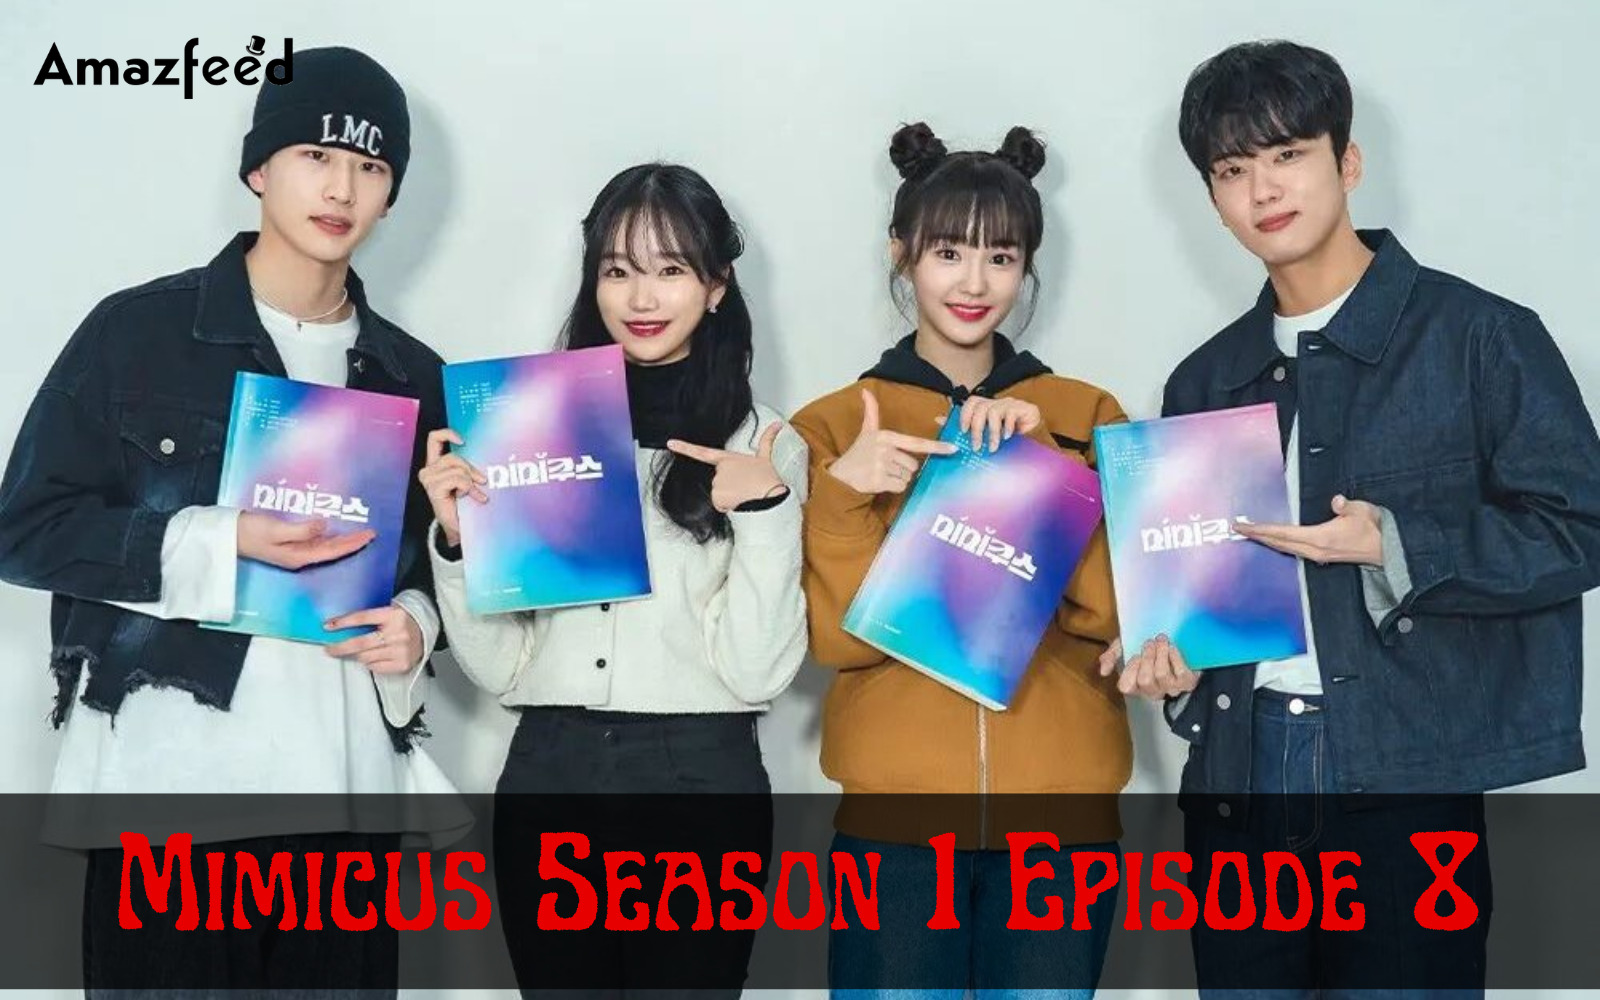 Mimicus Season 1 Episode 8 Expected Release Date (1)